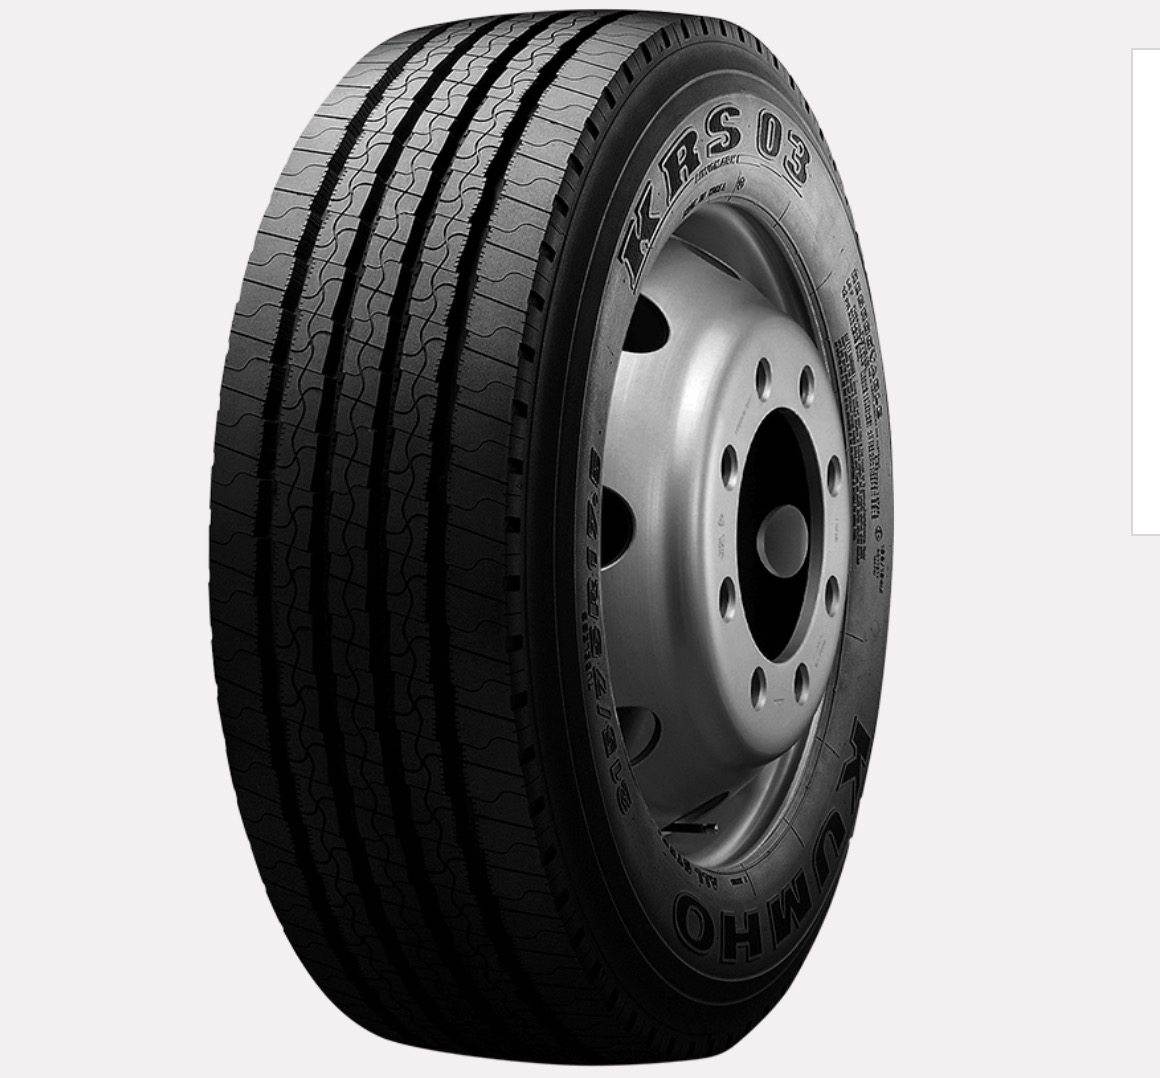 Kumho KRS03 235/75R17.5 132/130M. In Stock now.